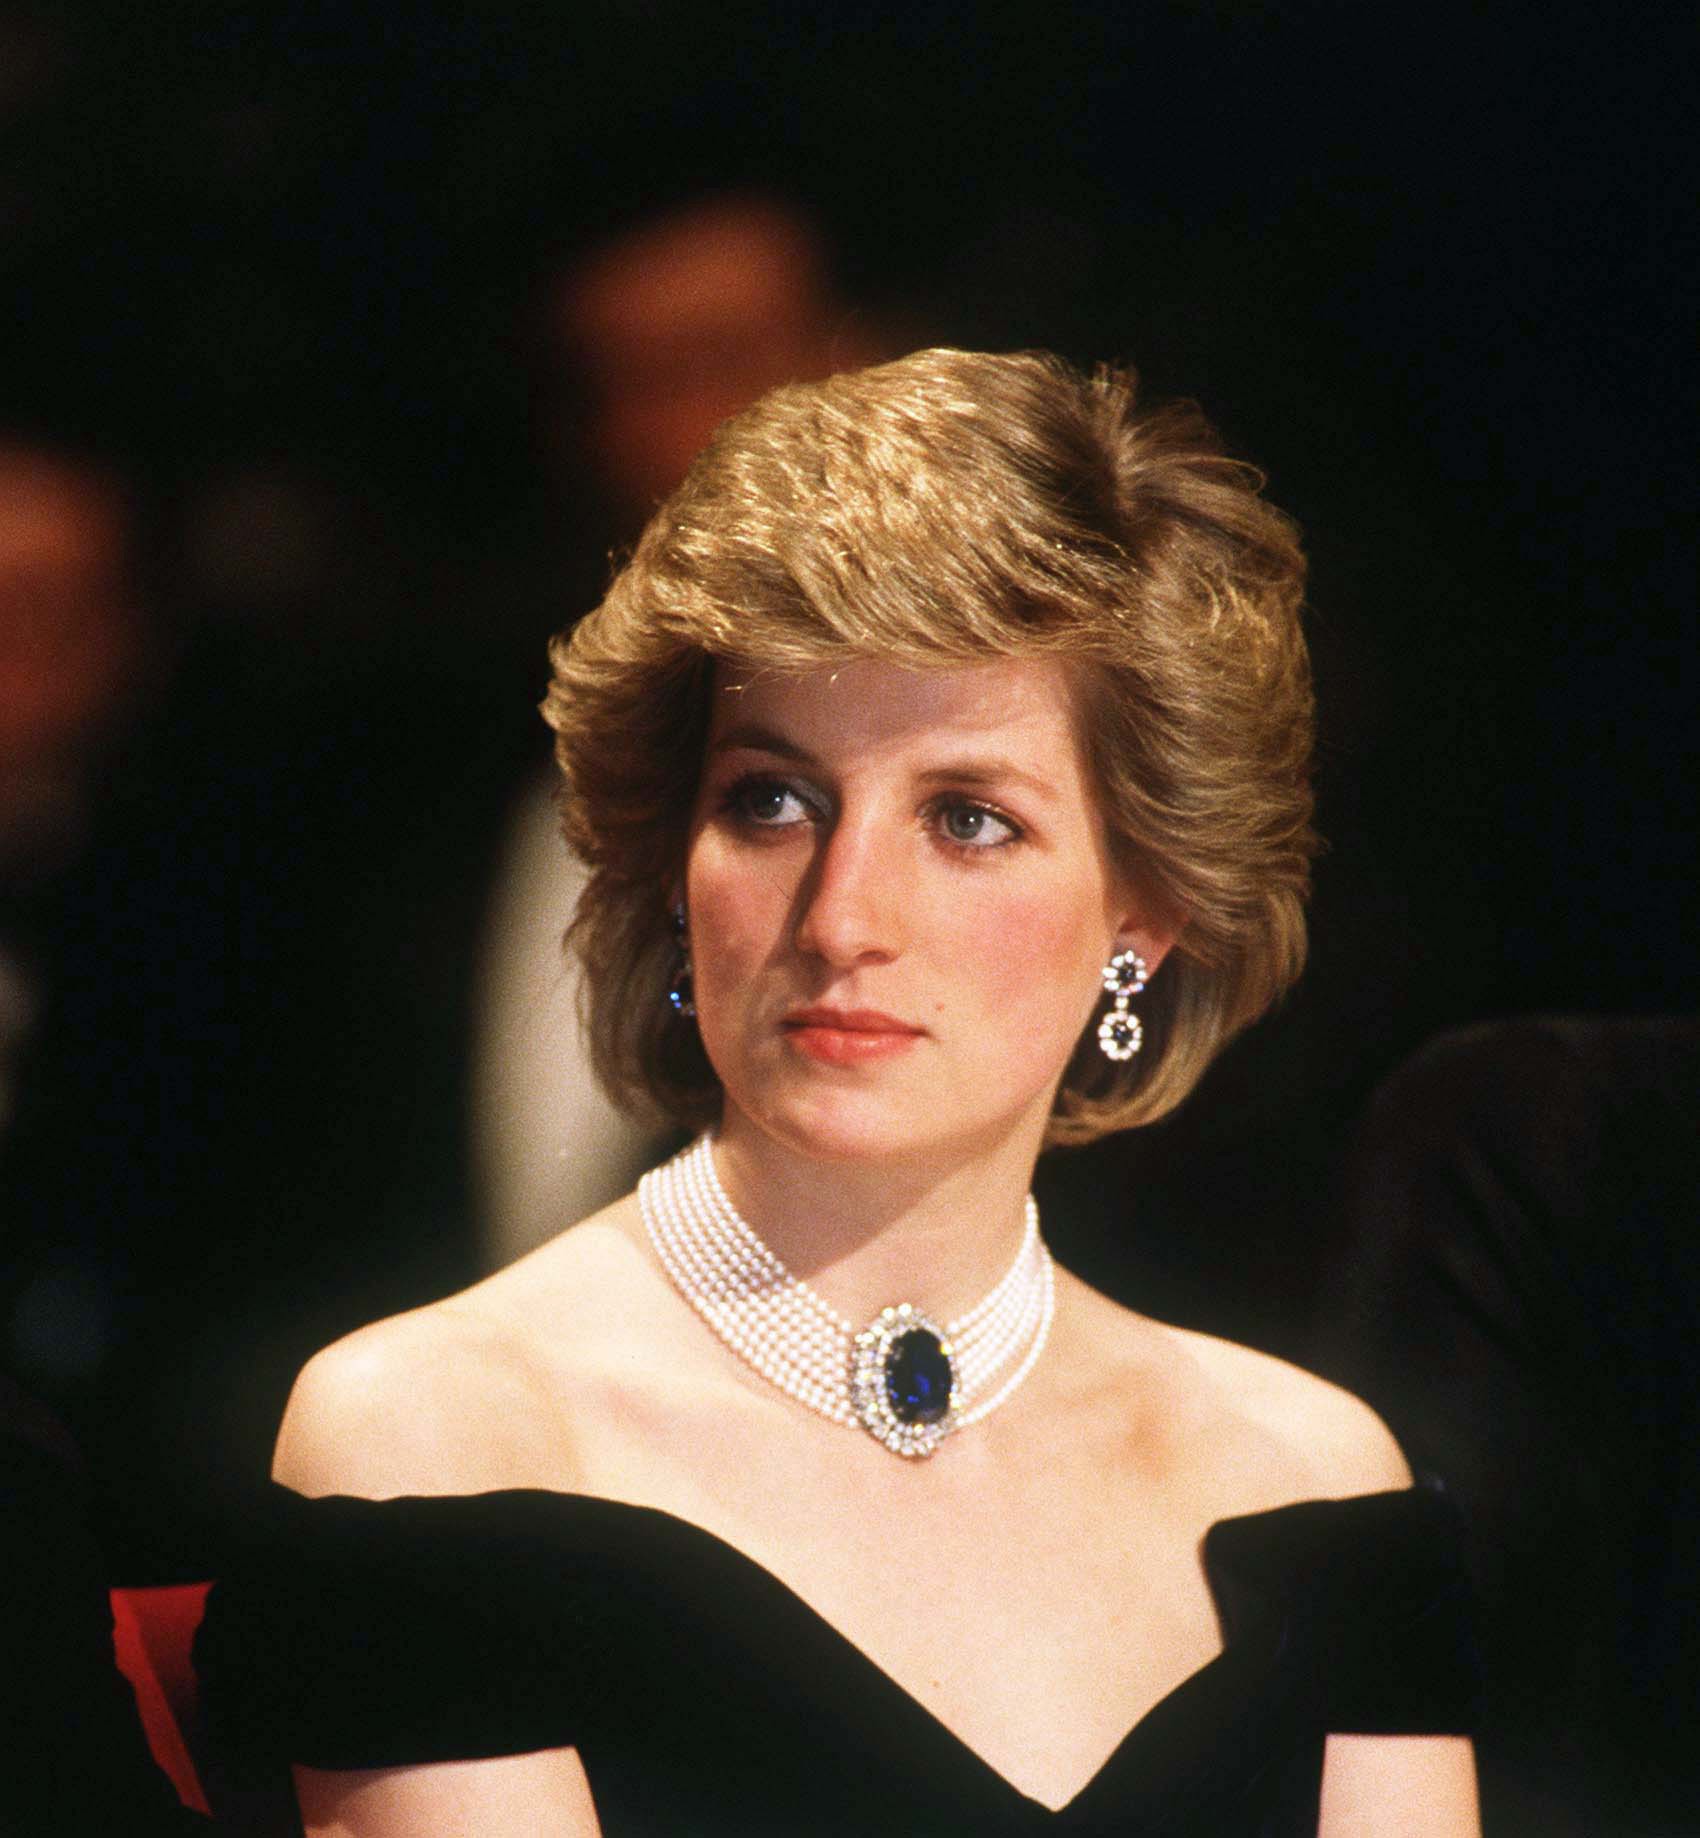 VIENNA, AUSTRIA - APRIL 16: Diana, Princess of Wales, wearing a midnight blue velvet, off the shoulder evening dress designed by Victor Edelstein, a sapphire, diamond and pearl choker and diamond and sapphire earrings, attends a state banquet on April 16, (Foto: WireImage)